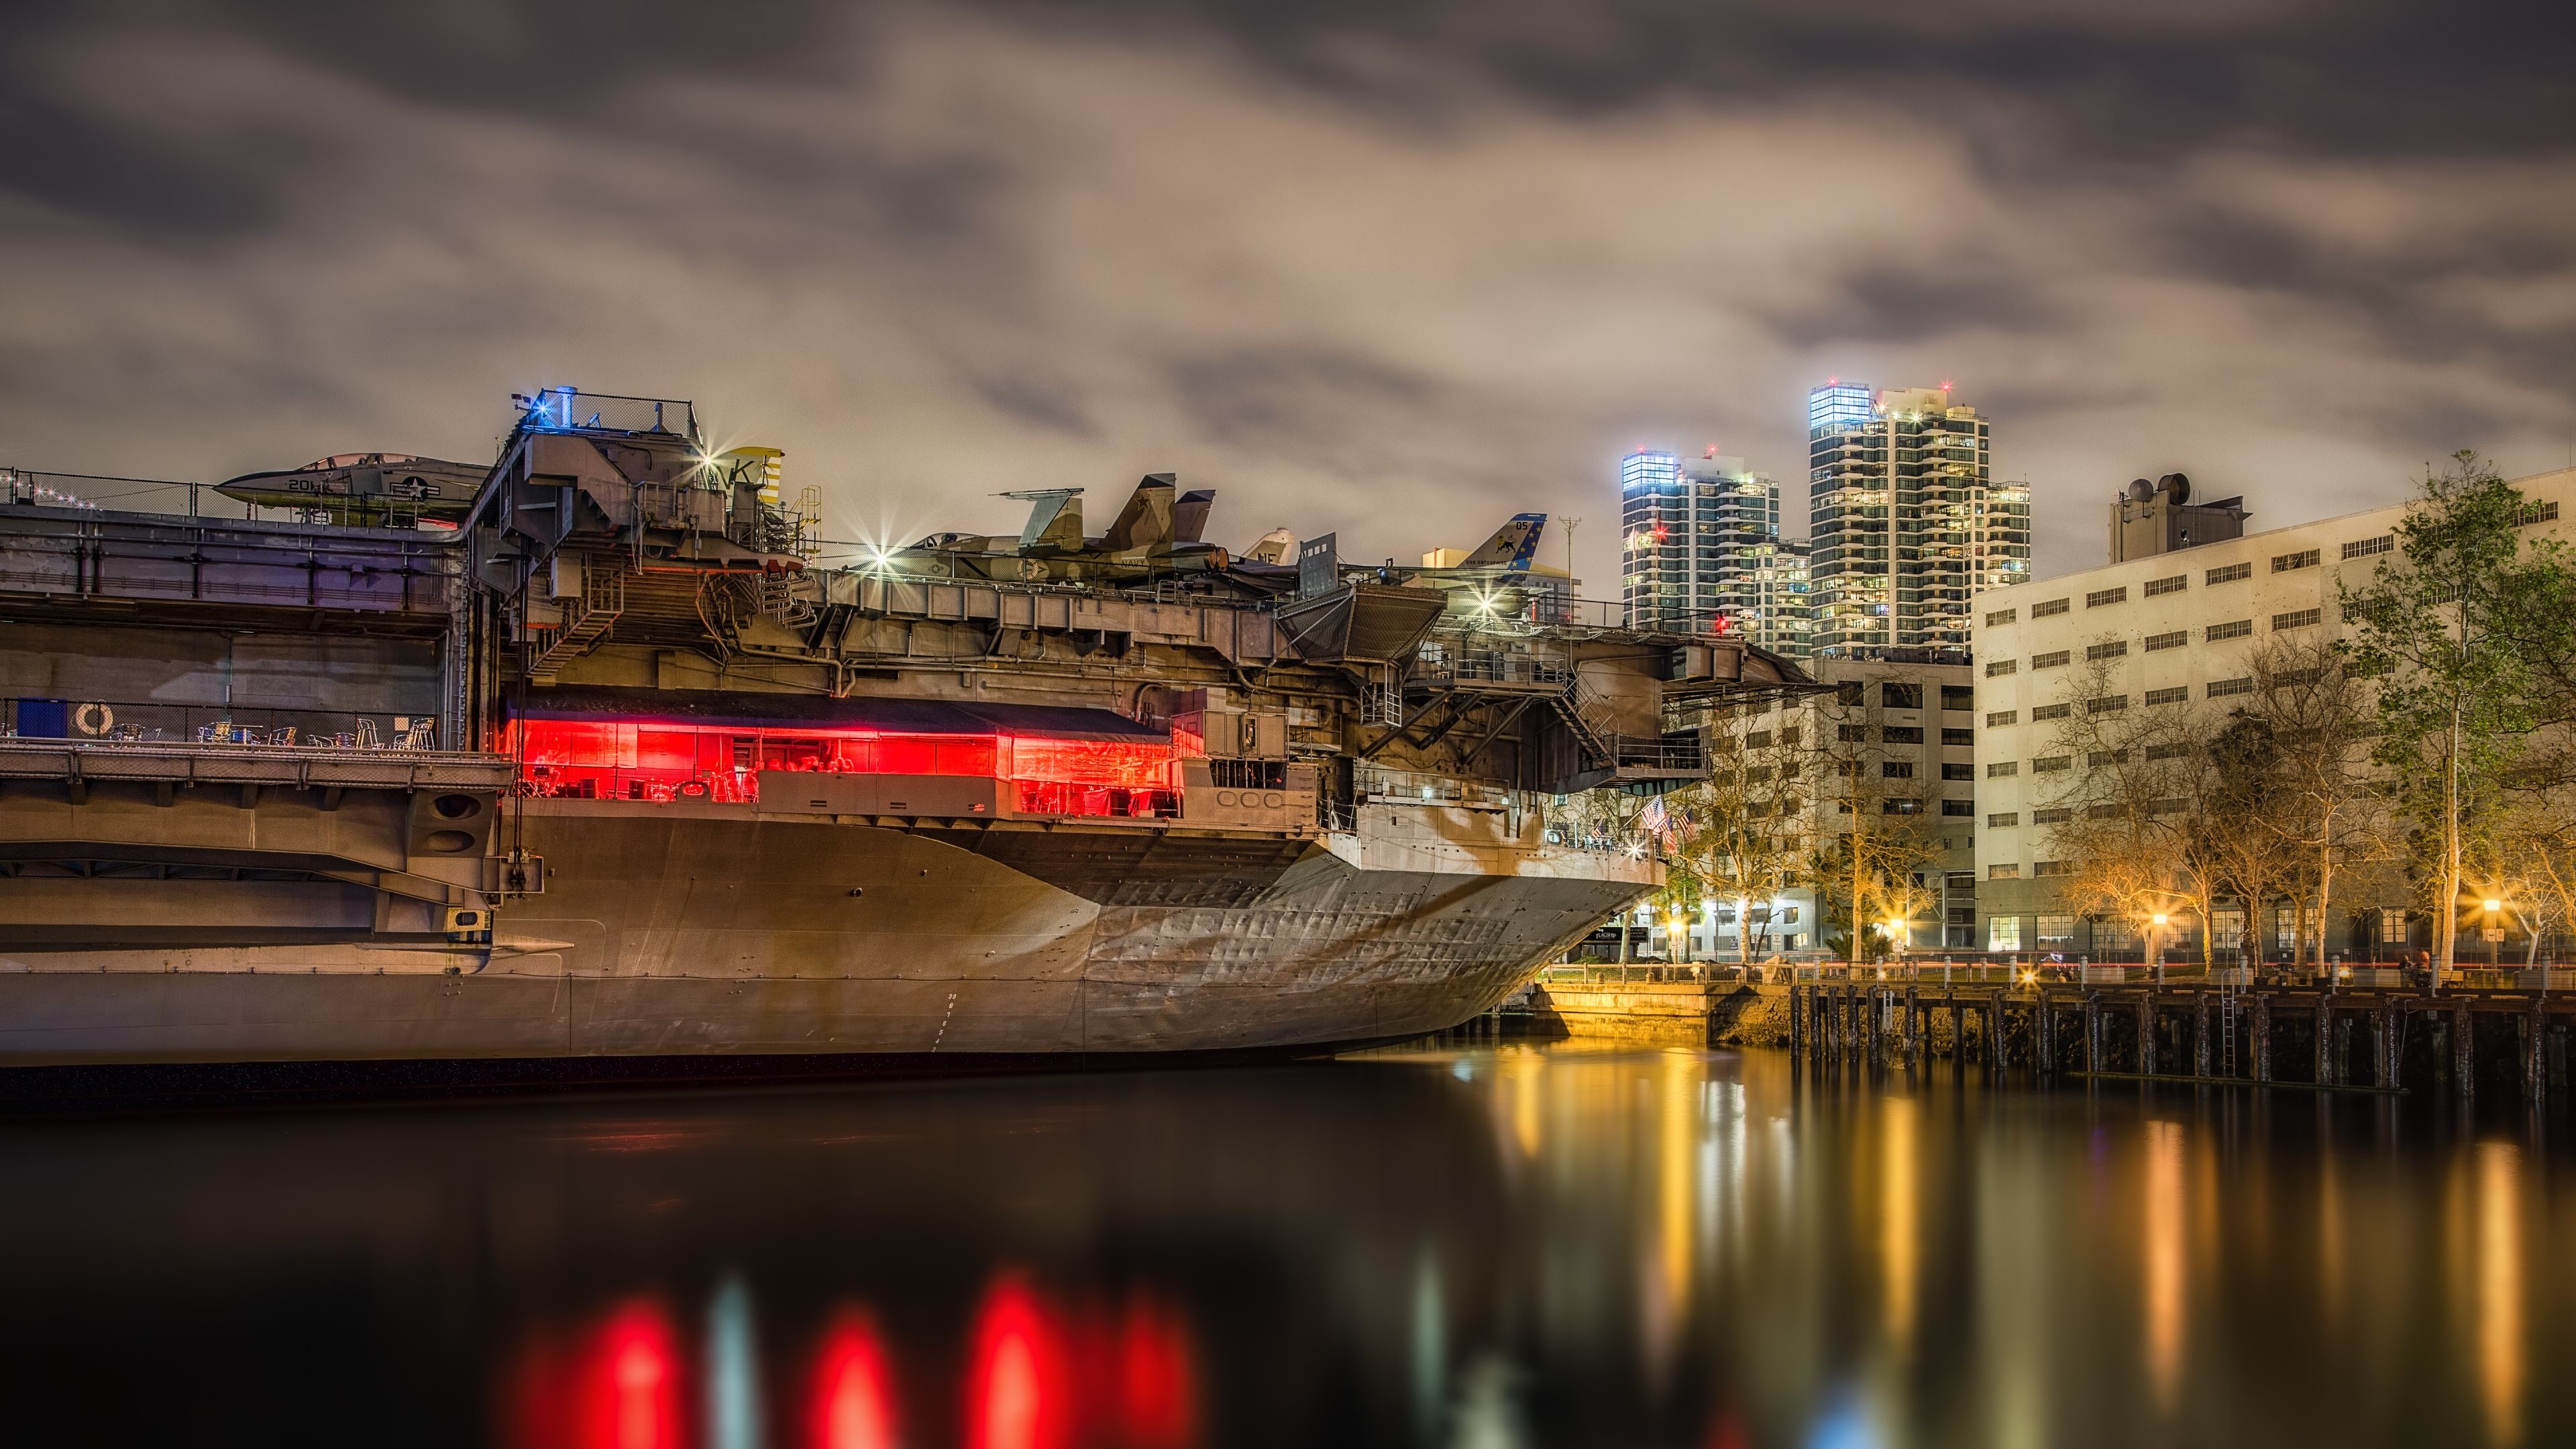 3840x2160 The 2nd 4K wallpaper with the USS Midway Aircraft Carrier optimized below  in 4K, HD and wide sizes for fit in any modern phone, tablet and desktop  screen